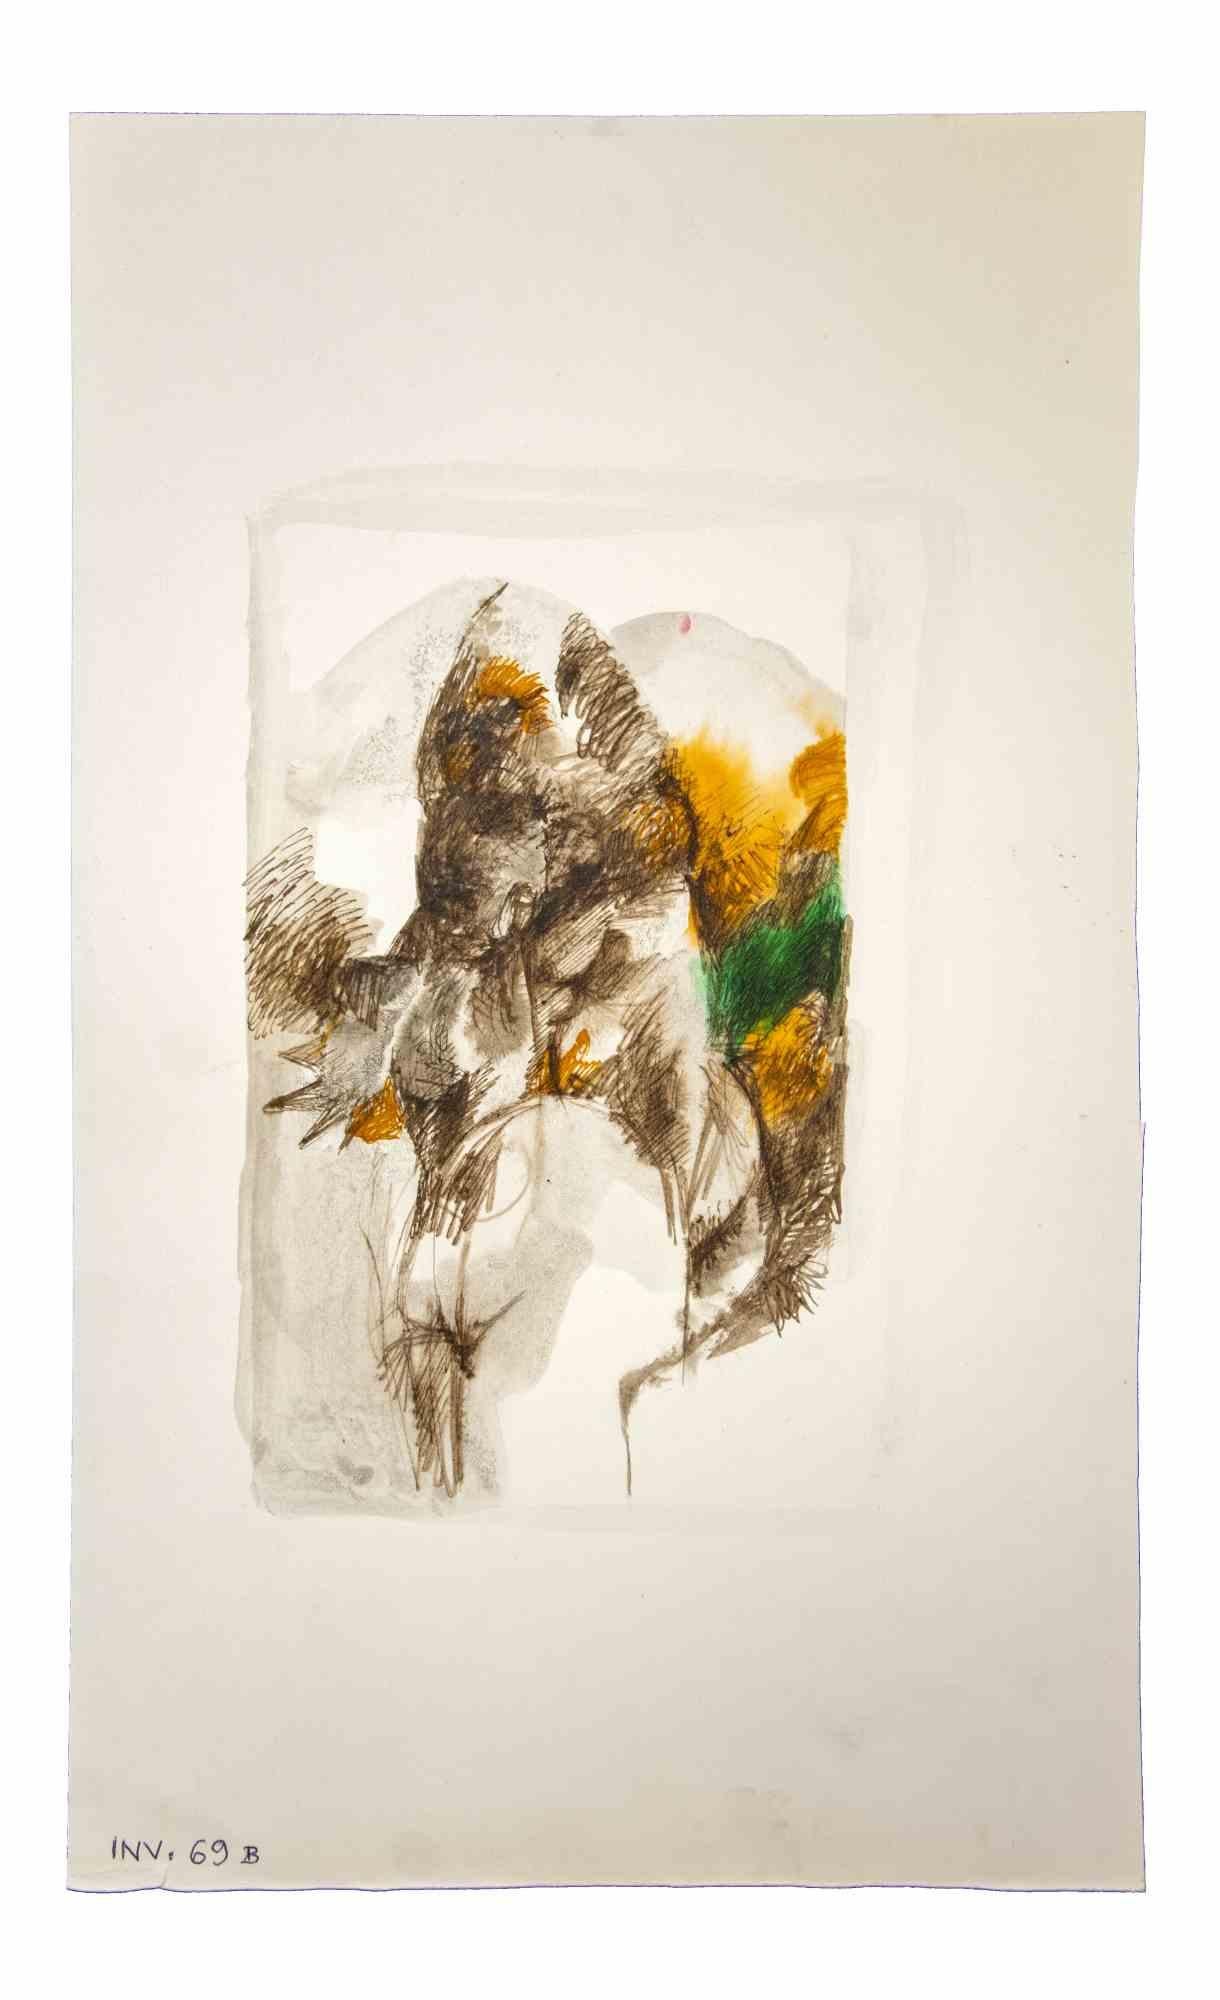 Composition is an original artwork realized in the 1970s by the Italian Contemporary artist  Leo Guida  (1992 - 2017).

Original drawings in china ink and Watercolor on paper.

Good conditions but aged.

The artwork is depicted through strong